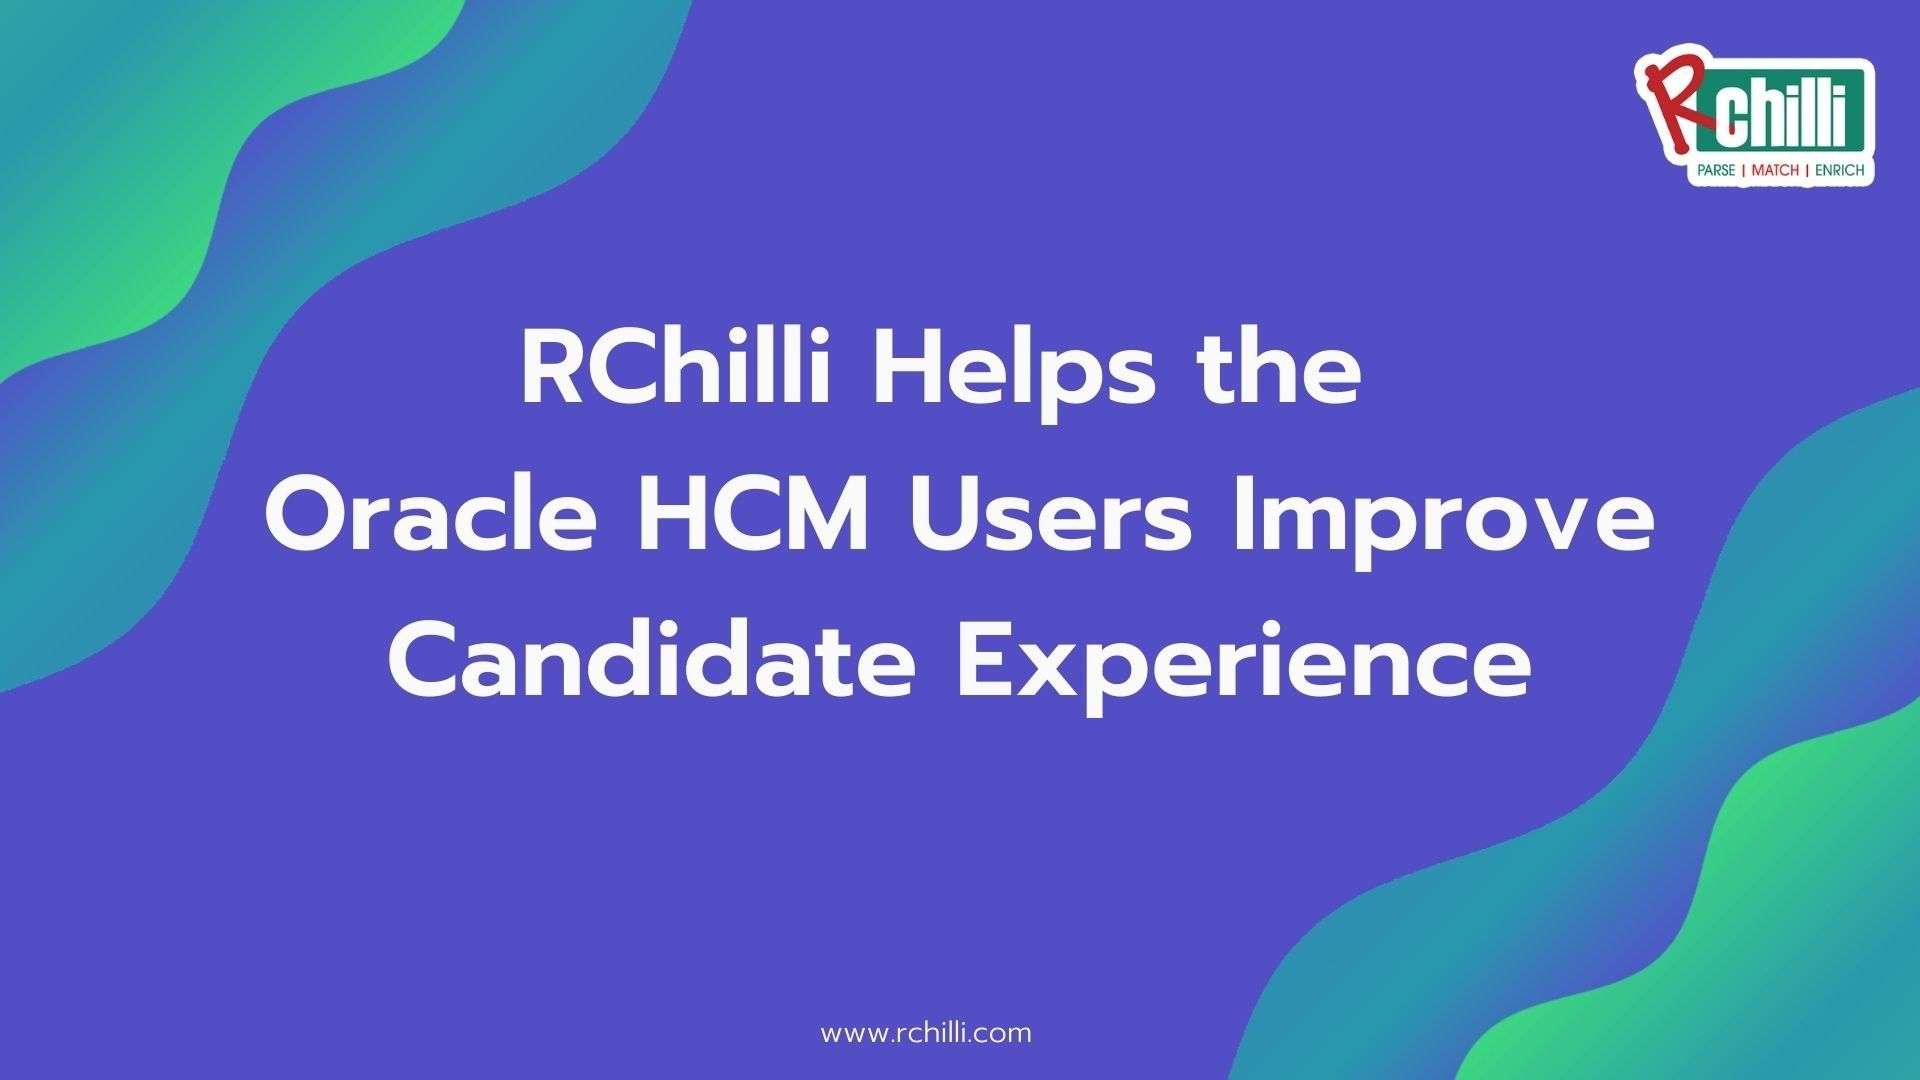 RChilli Helps the Oracle HCM Users Improve Candidate Experience